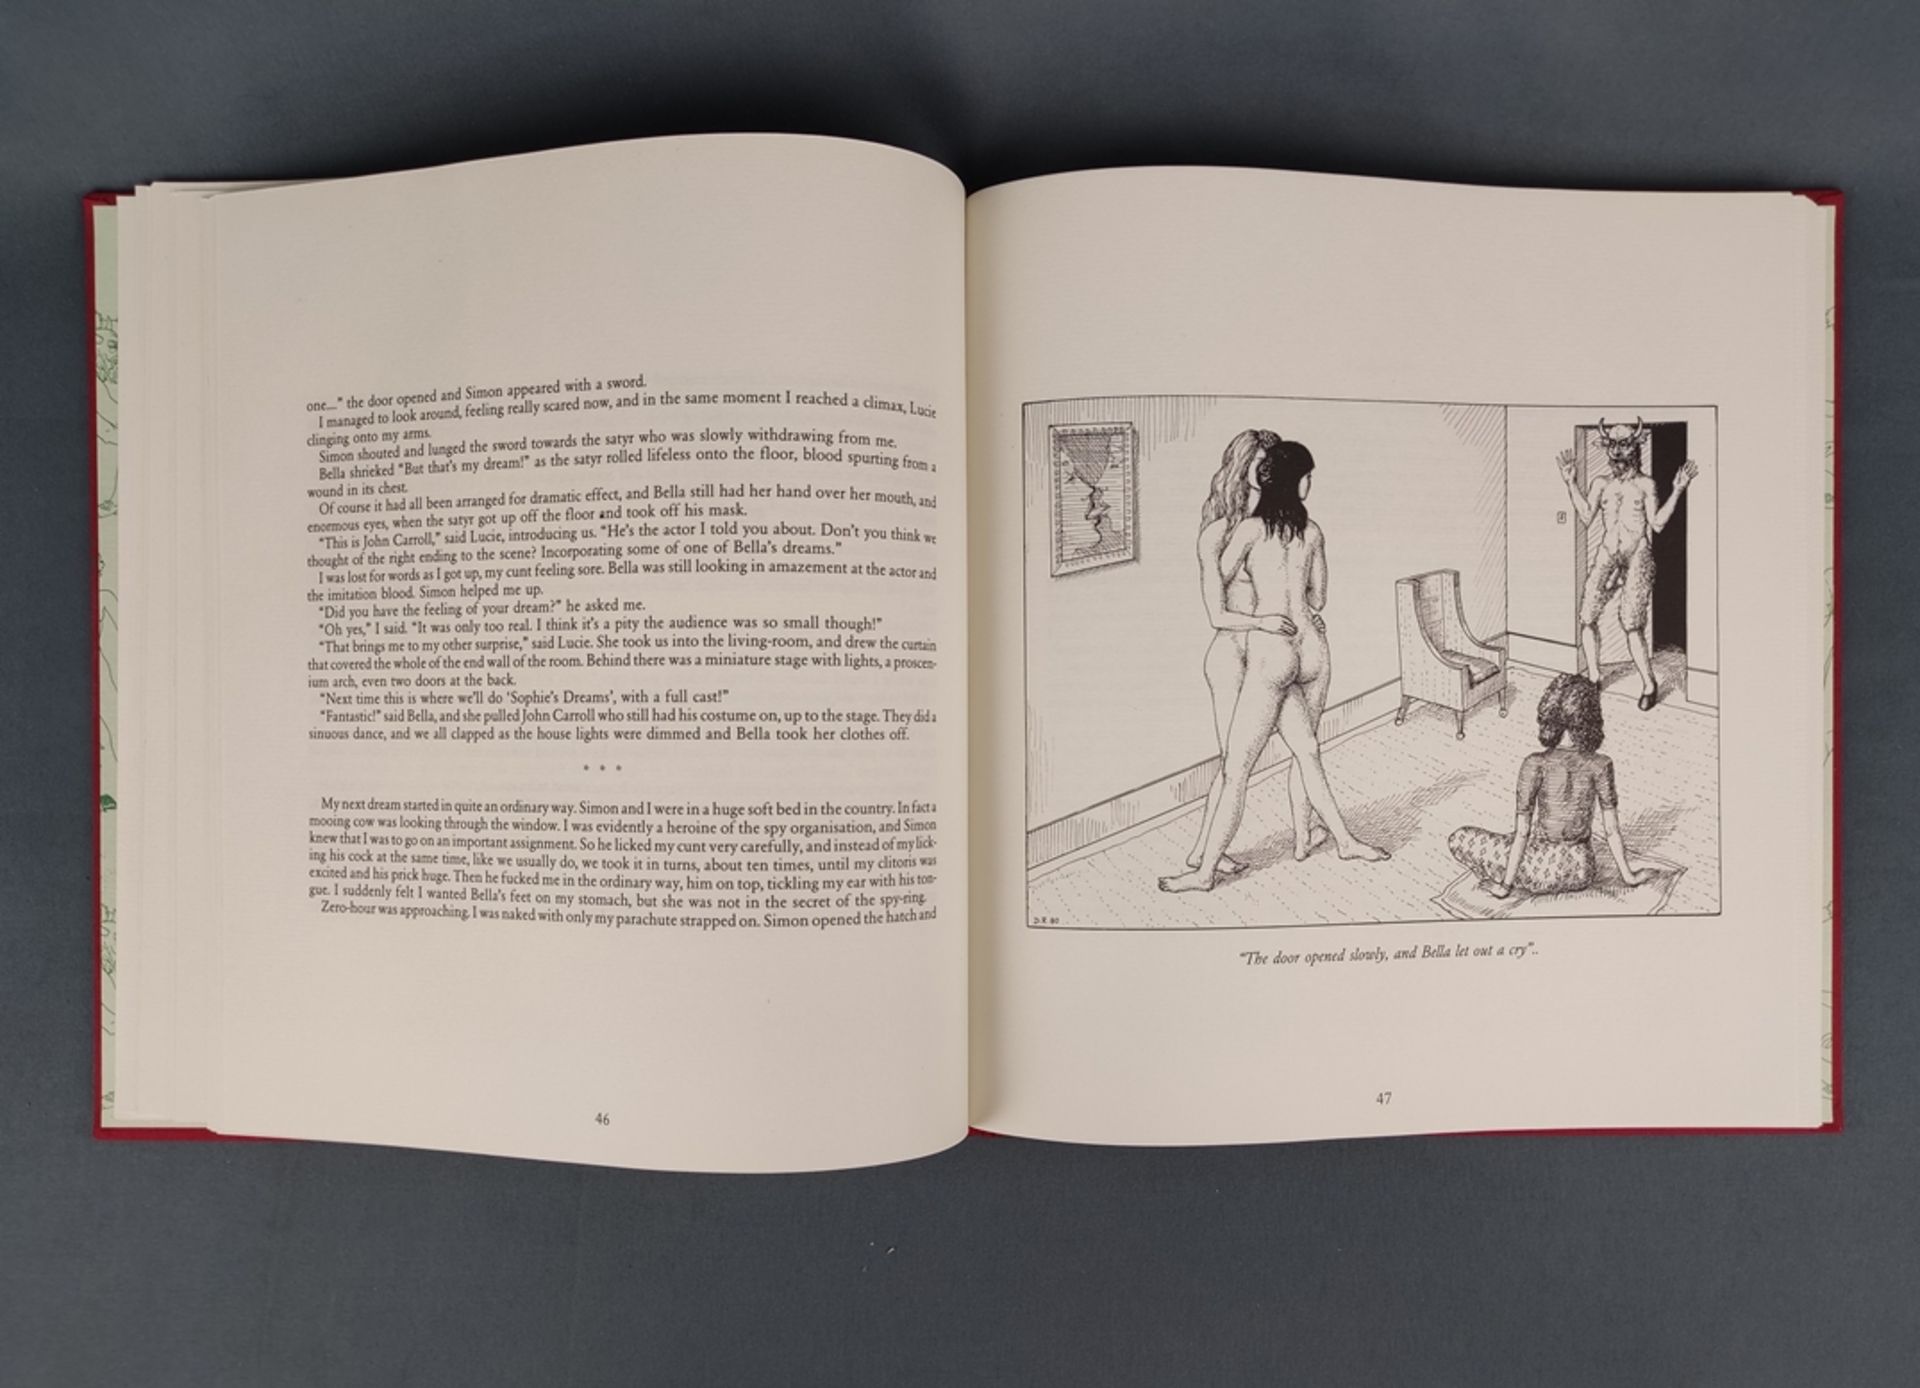 Erotica: Russel, David (20th/21st century) "Sophie's Dream Book", with illustrations by the author, - Image 6 of 6